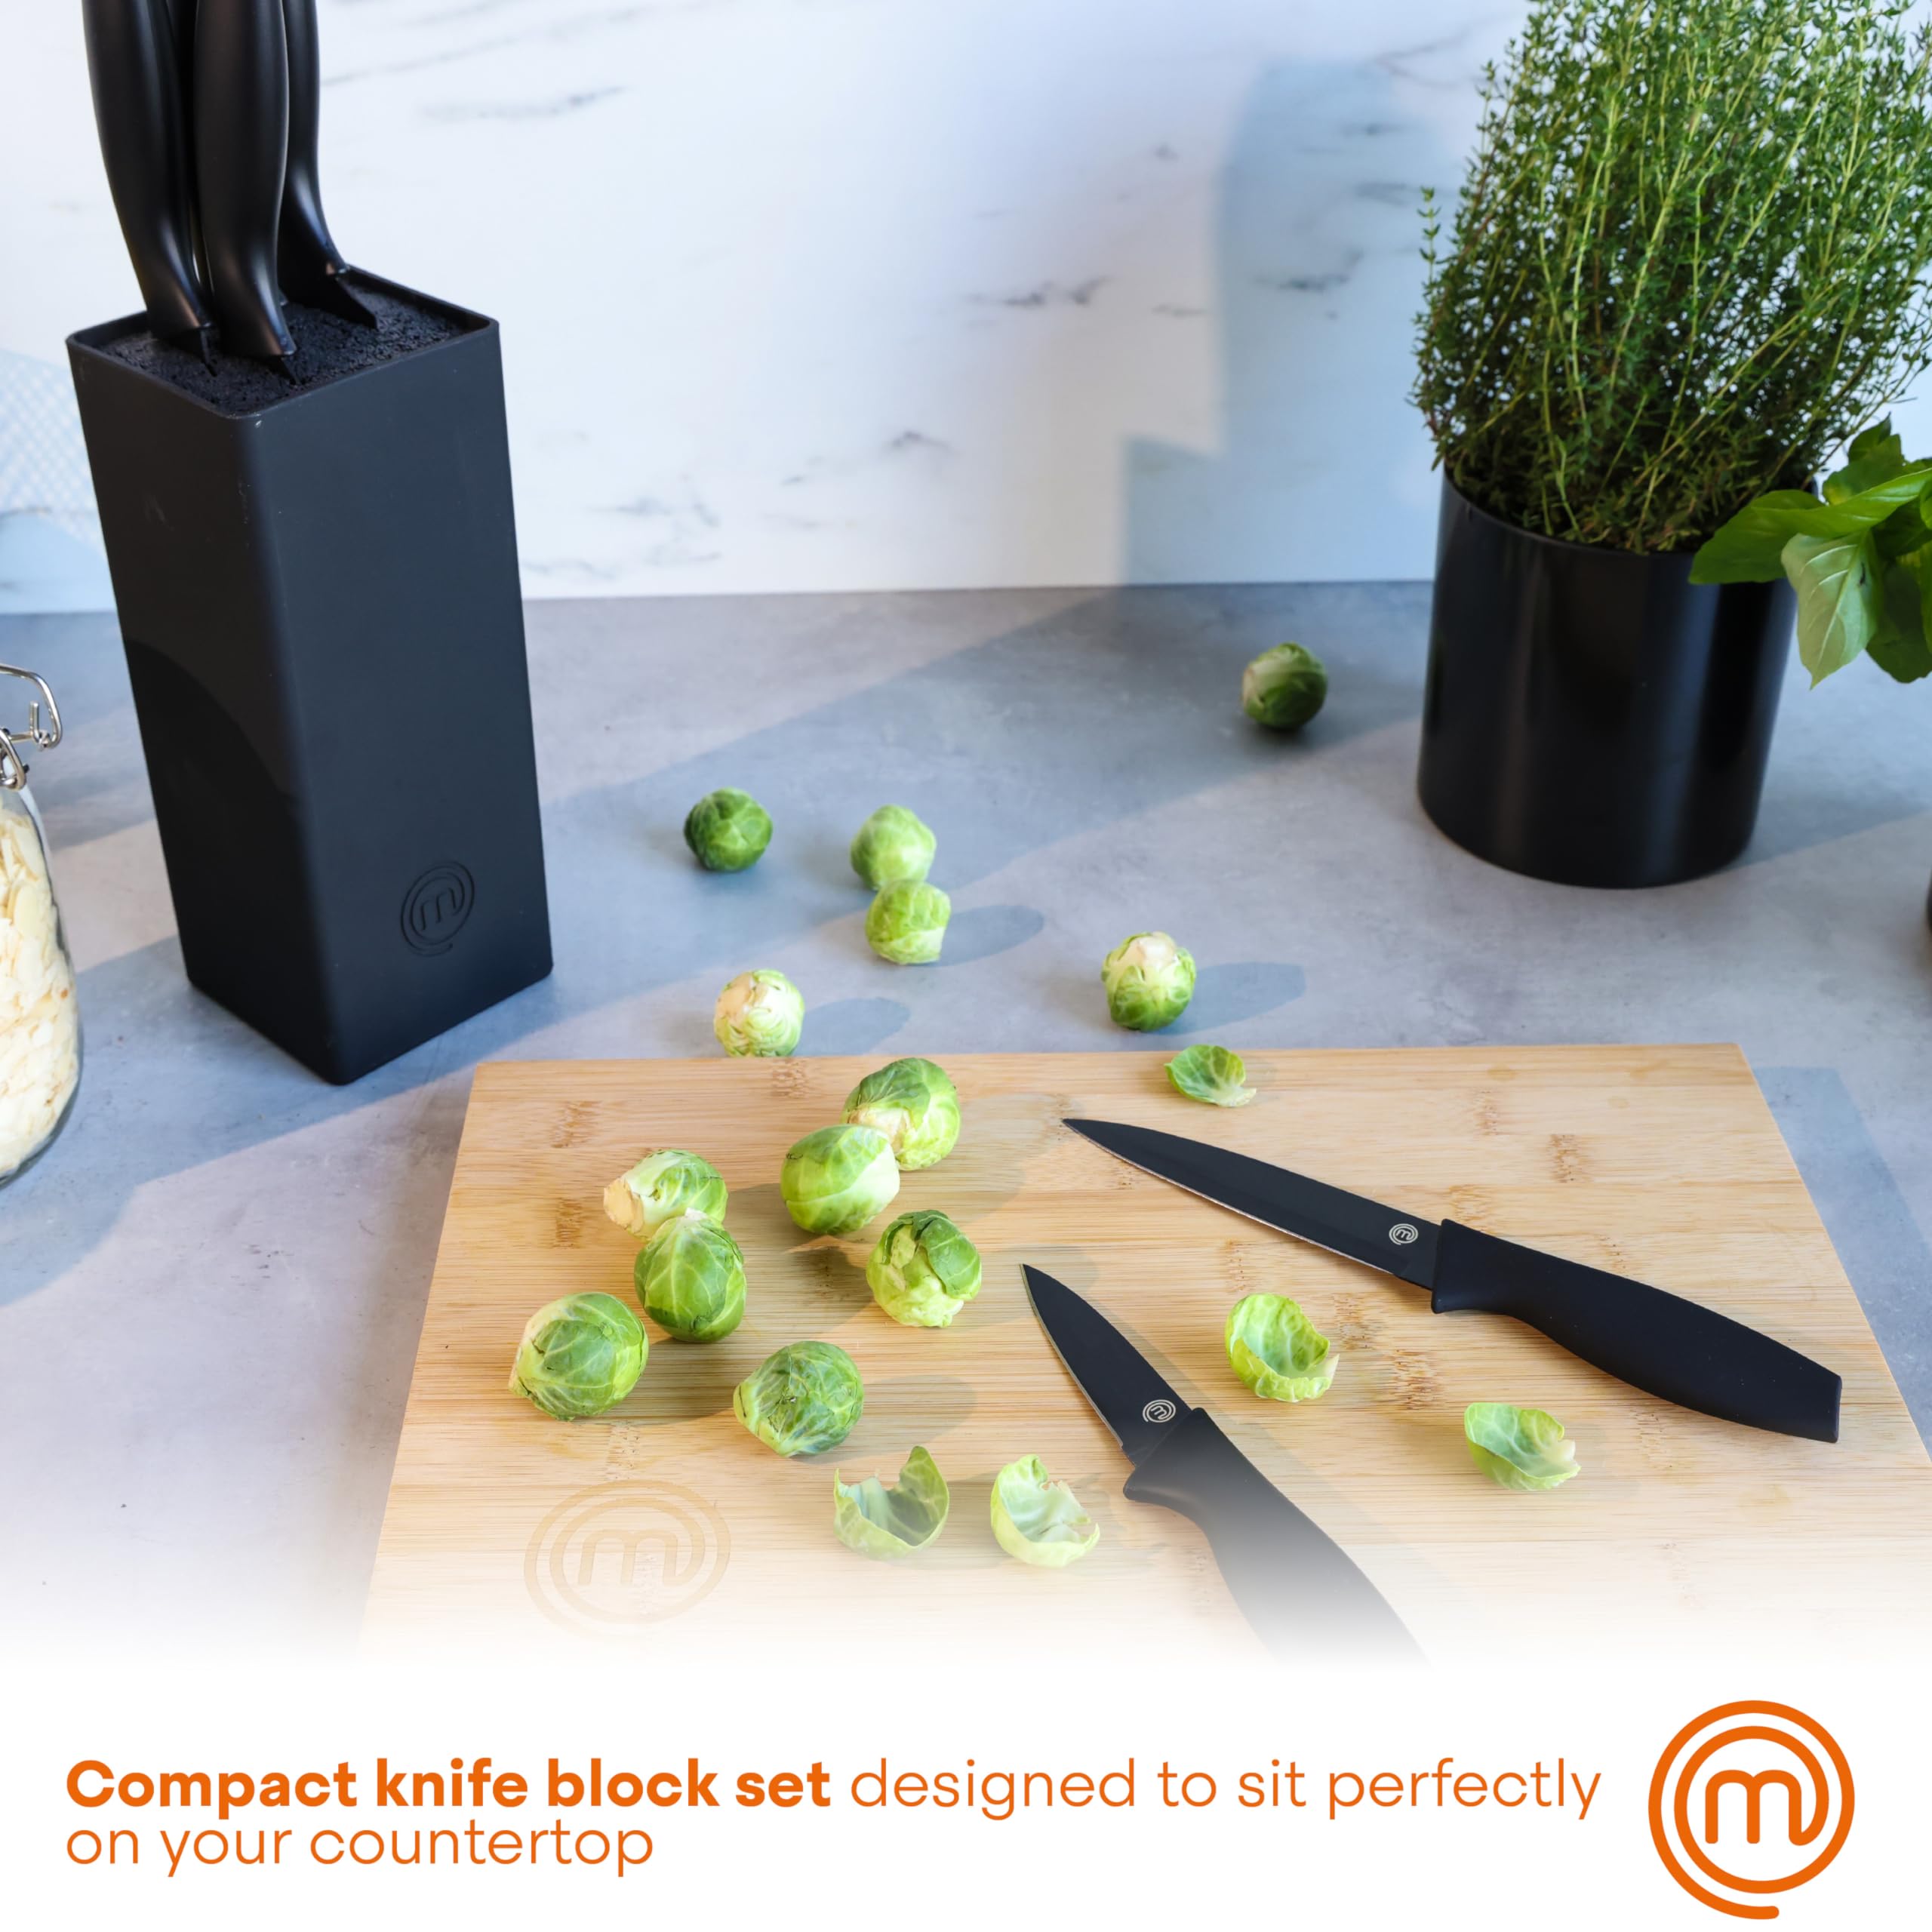 MasterChef Knife Block Set of 6 Kitchen Knives, Extra Sharp Stainless Steel Blades for Professional Cutting with Non Stick Coating & Soft Touch Easy Grip Handles in a Universal Block, Essential Black